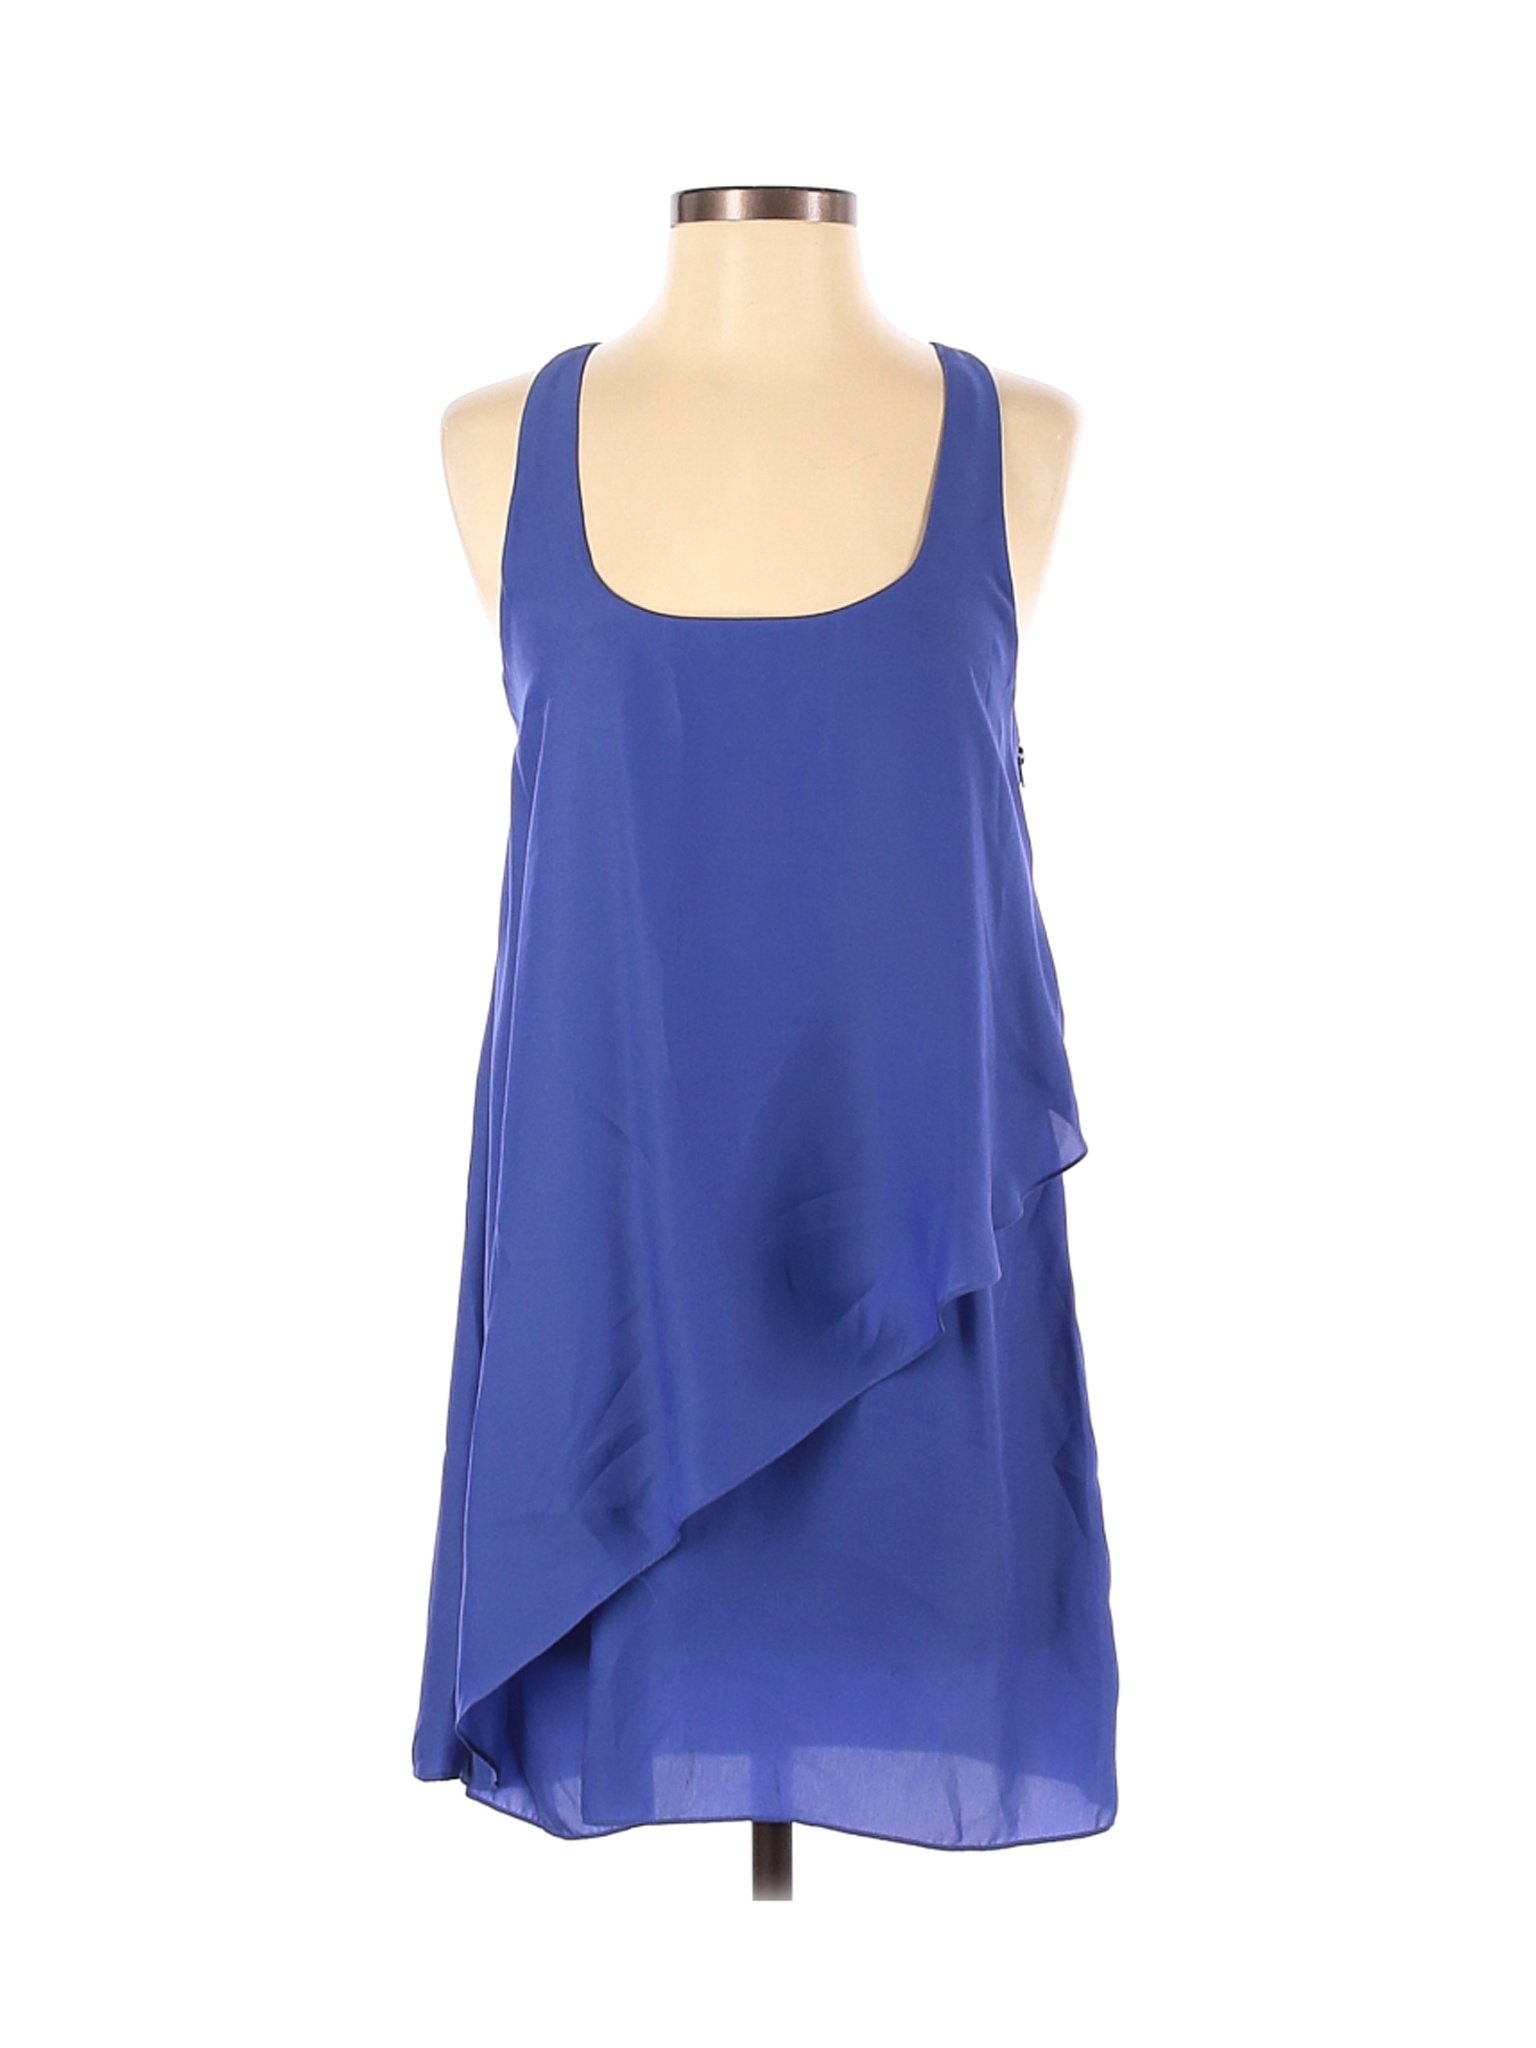 Silence and Noise Women Blue Casual Dress S | eBay